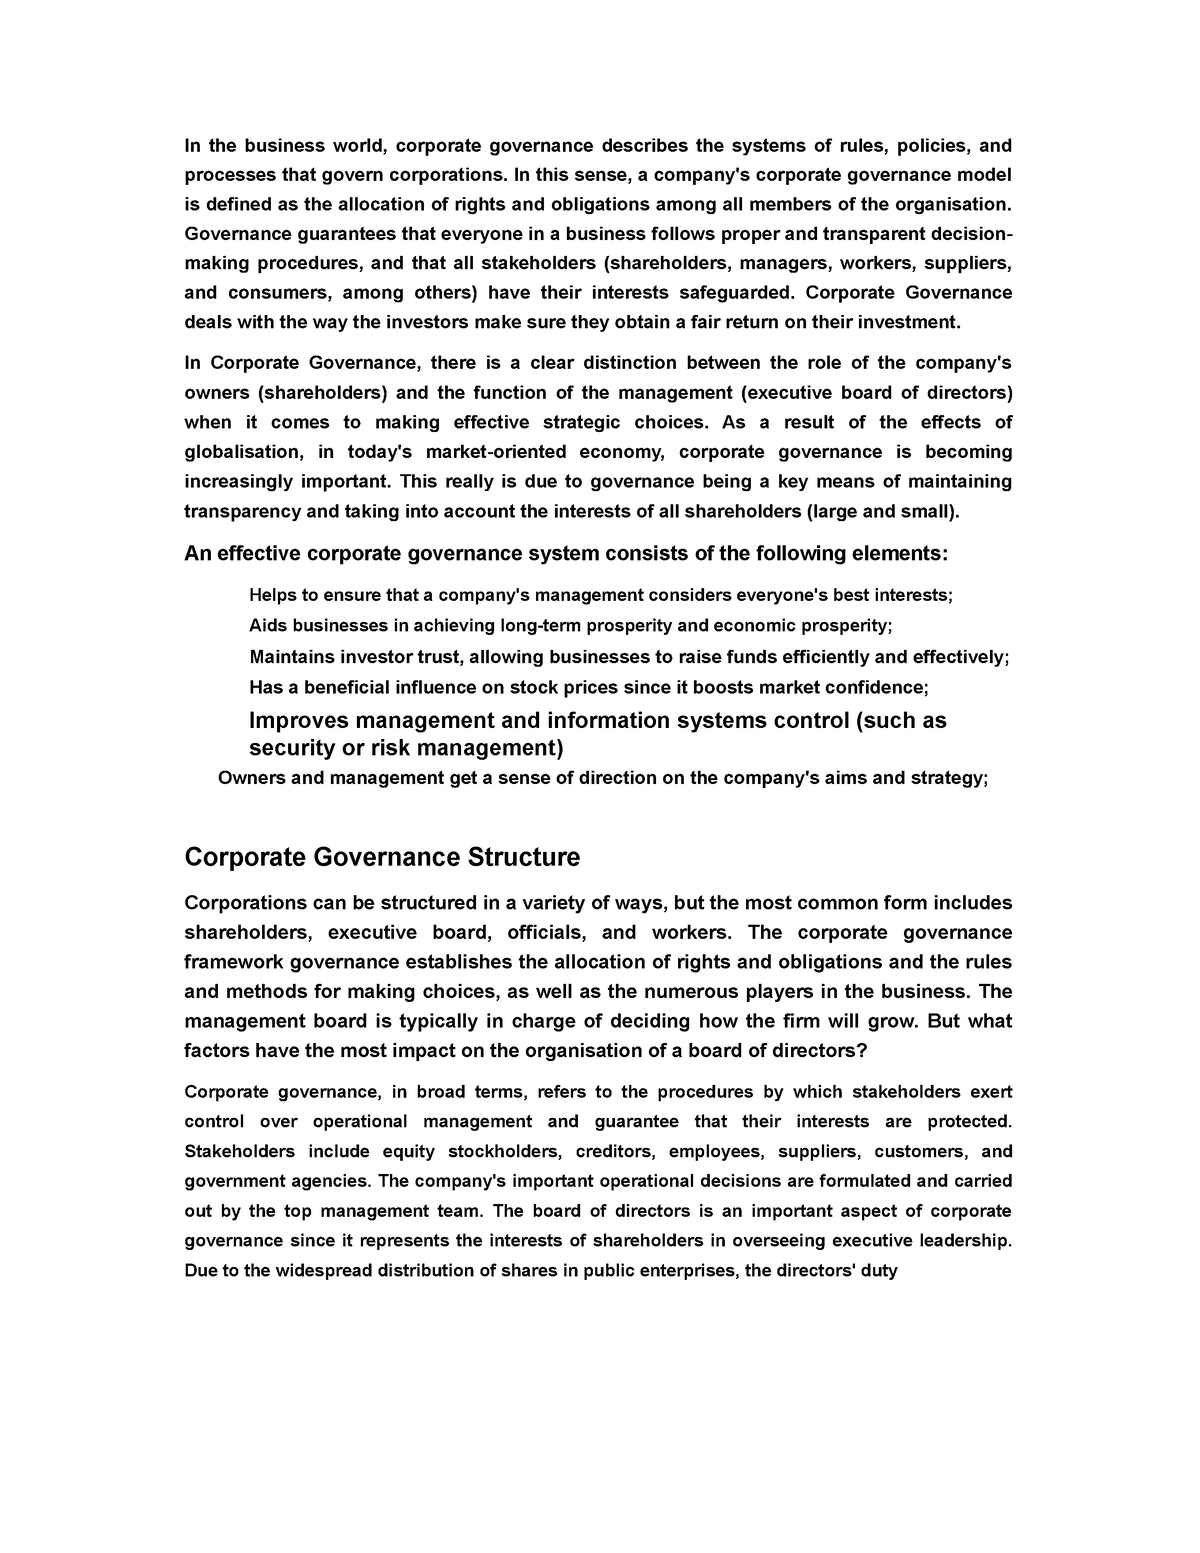 phd thesis on corporate governance